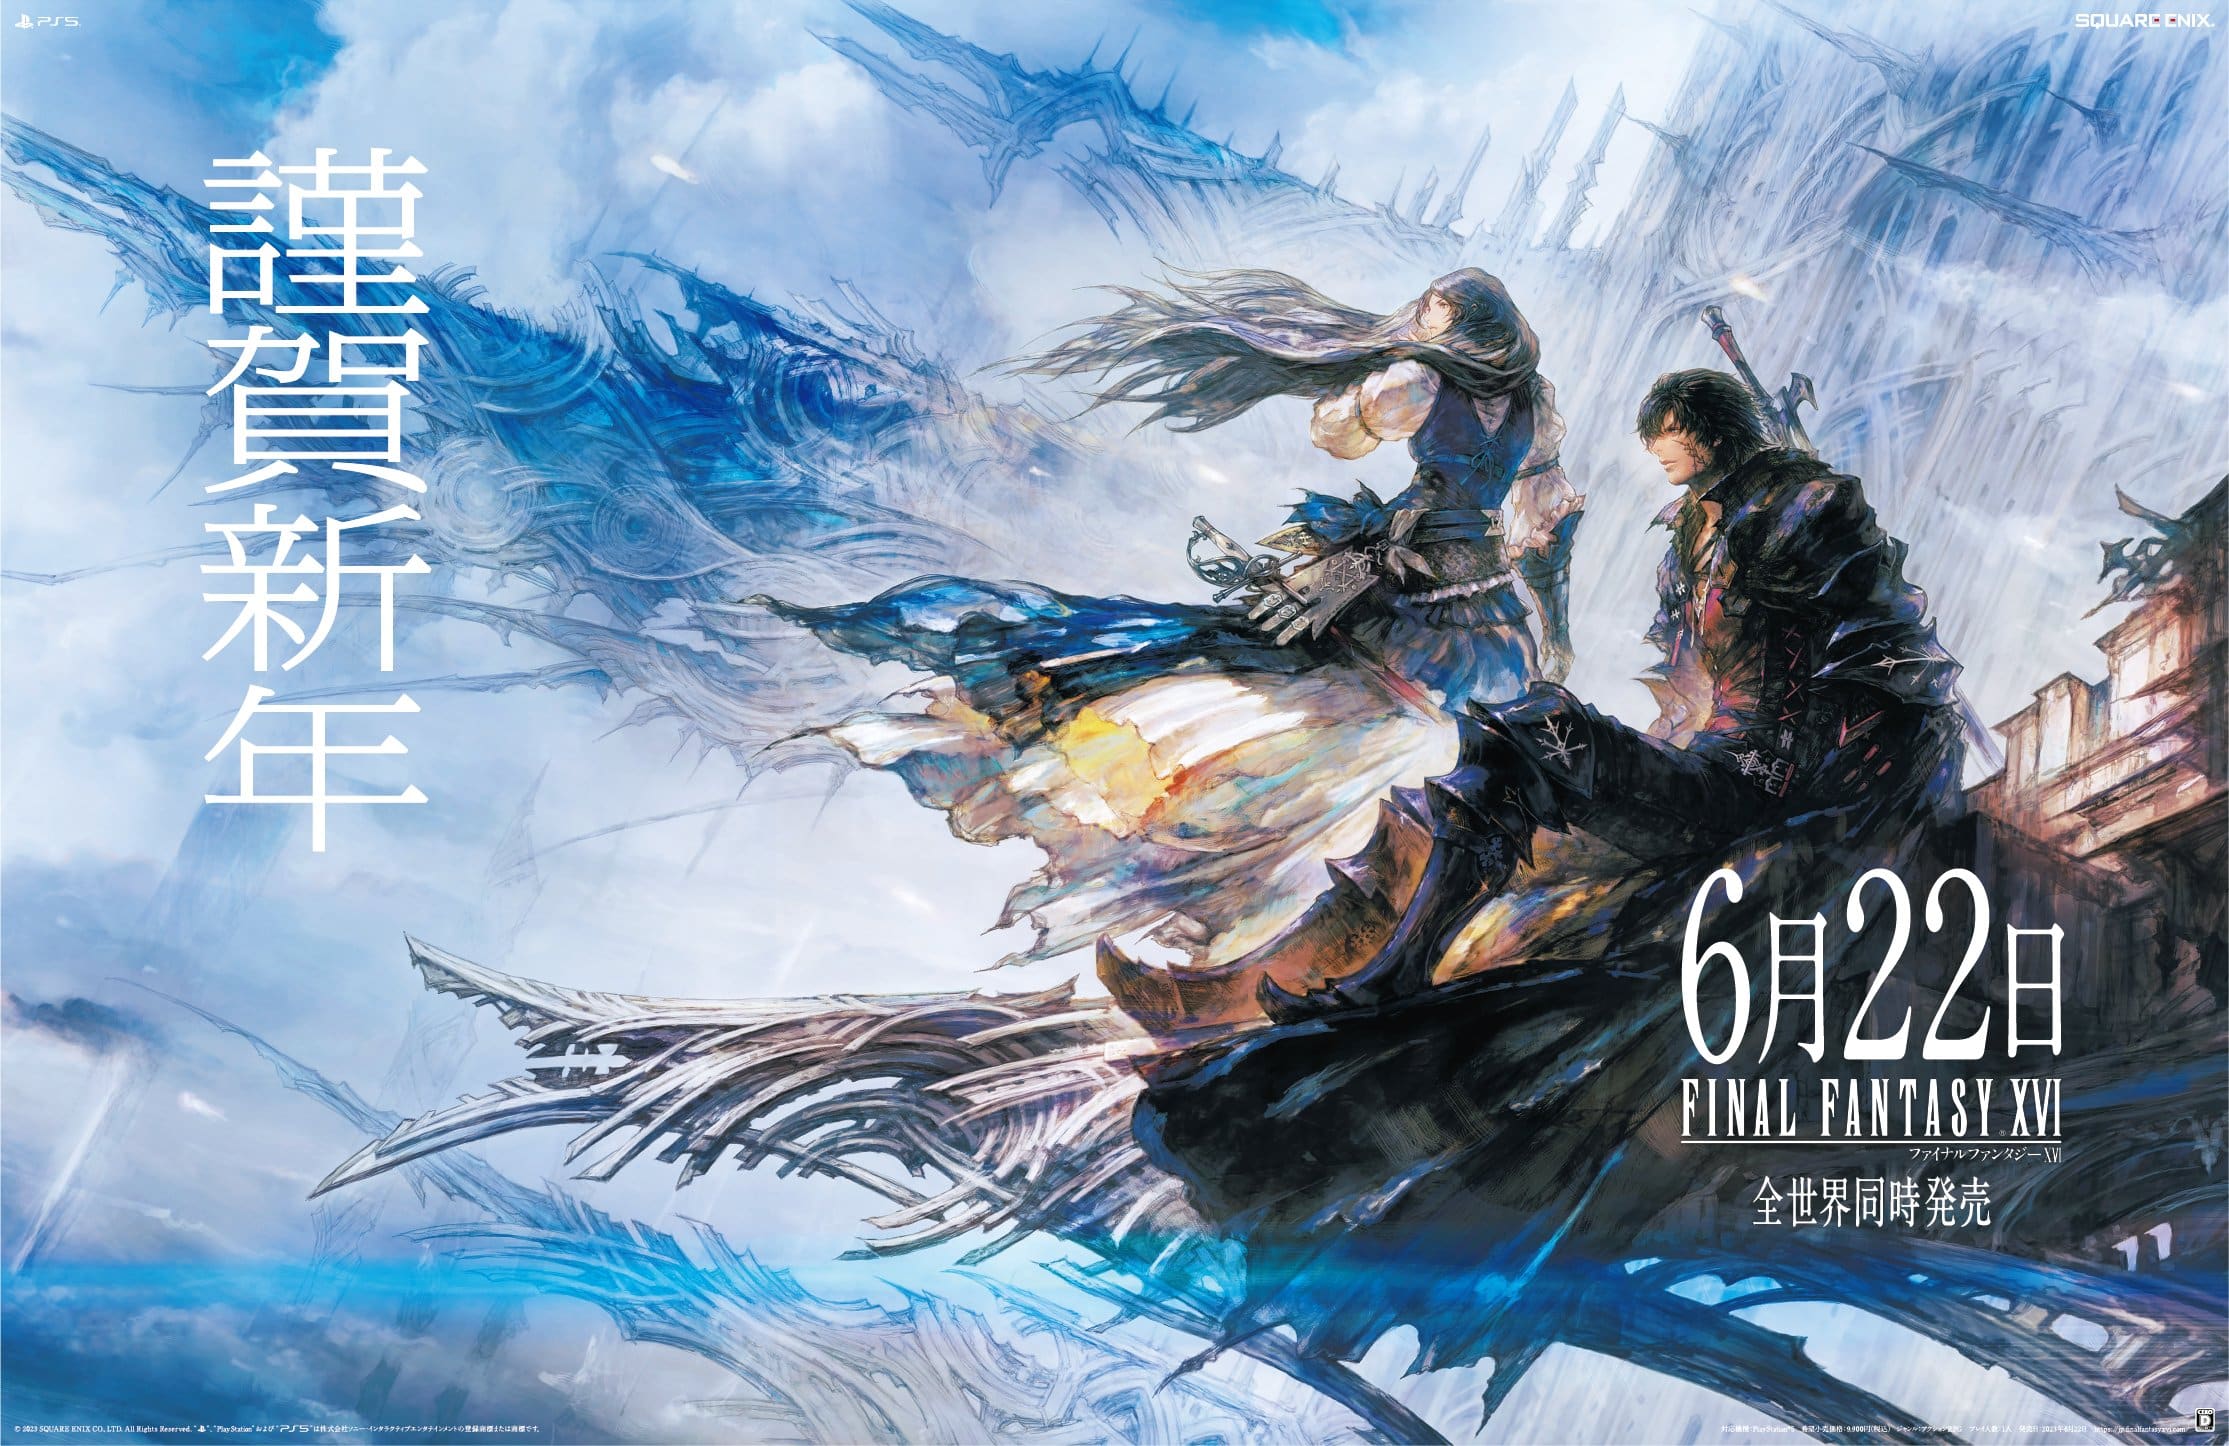 New Final Fantasy 16 Artwork Revealed as Part of New Year Celebration